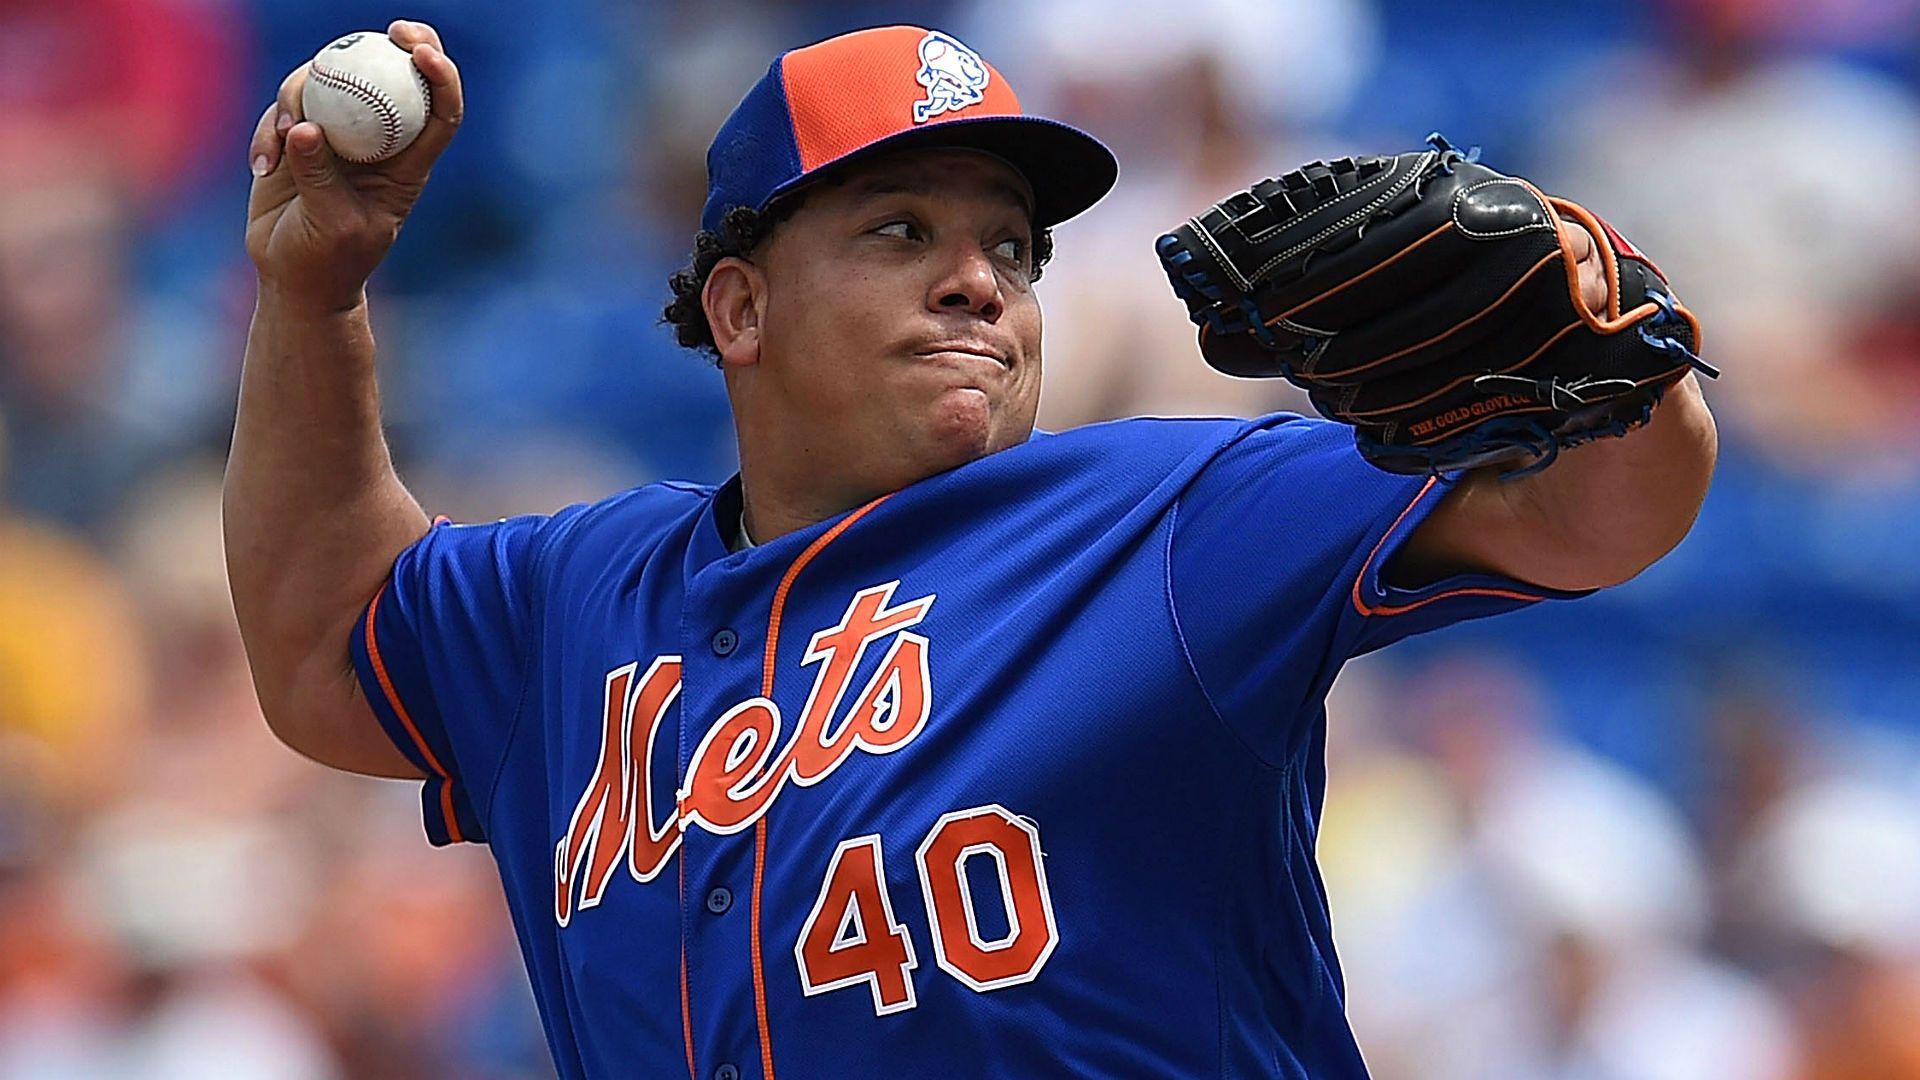 Bartolo Colon shows no signs of slowing down, even as his fastball